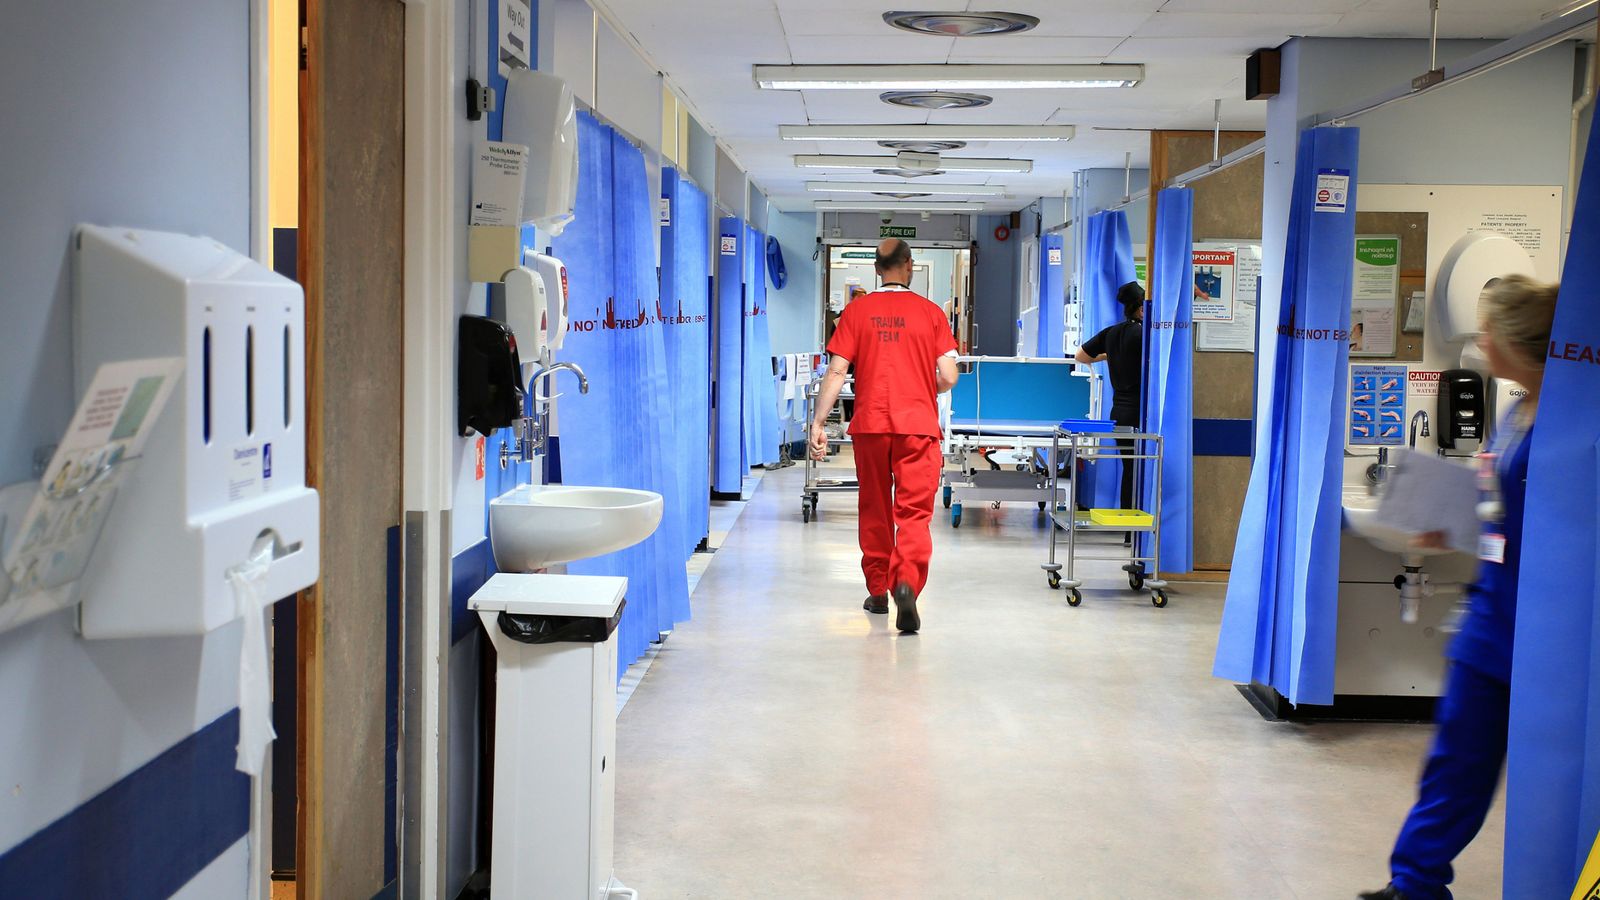 NHS staff shortages led to 30,000 cancelled operations last year, data reveals